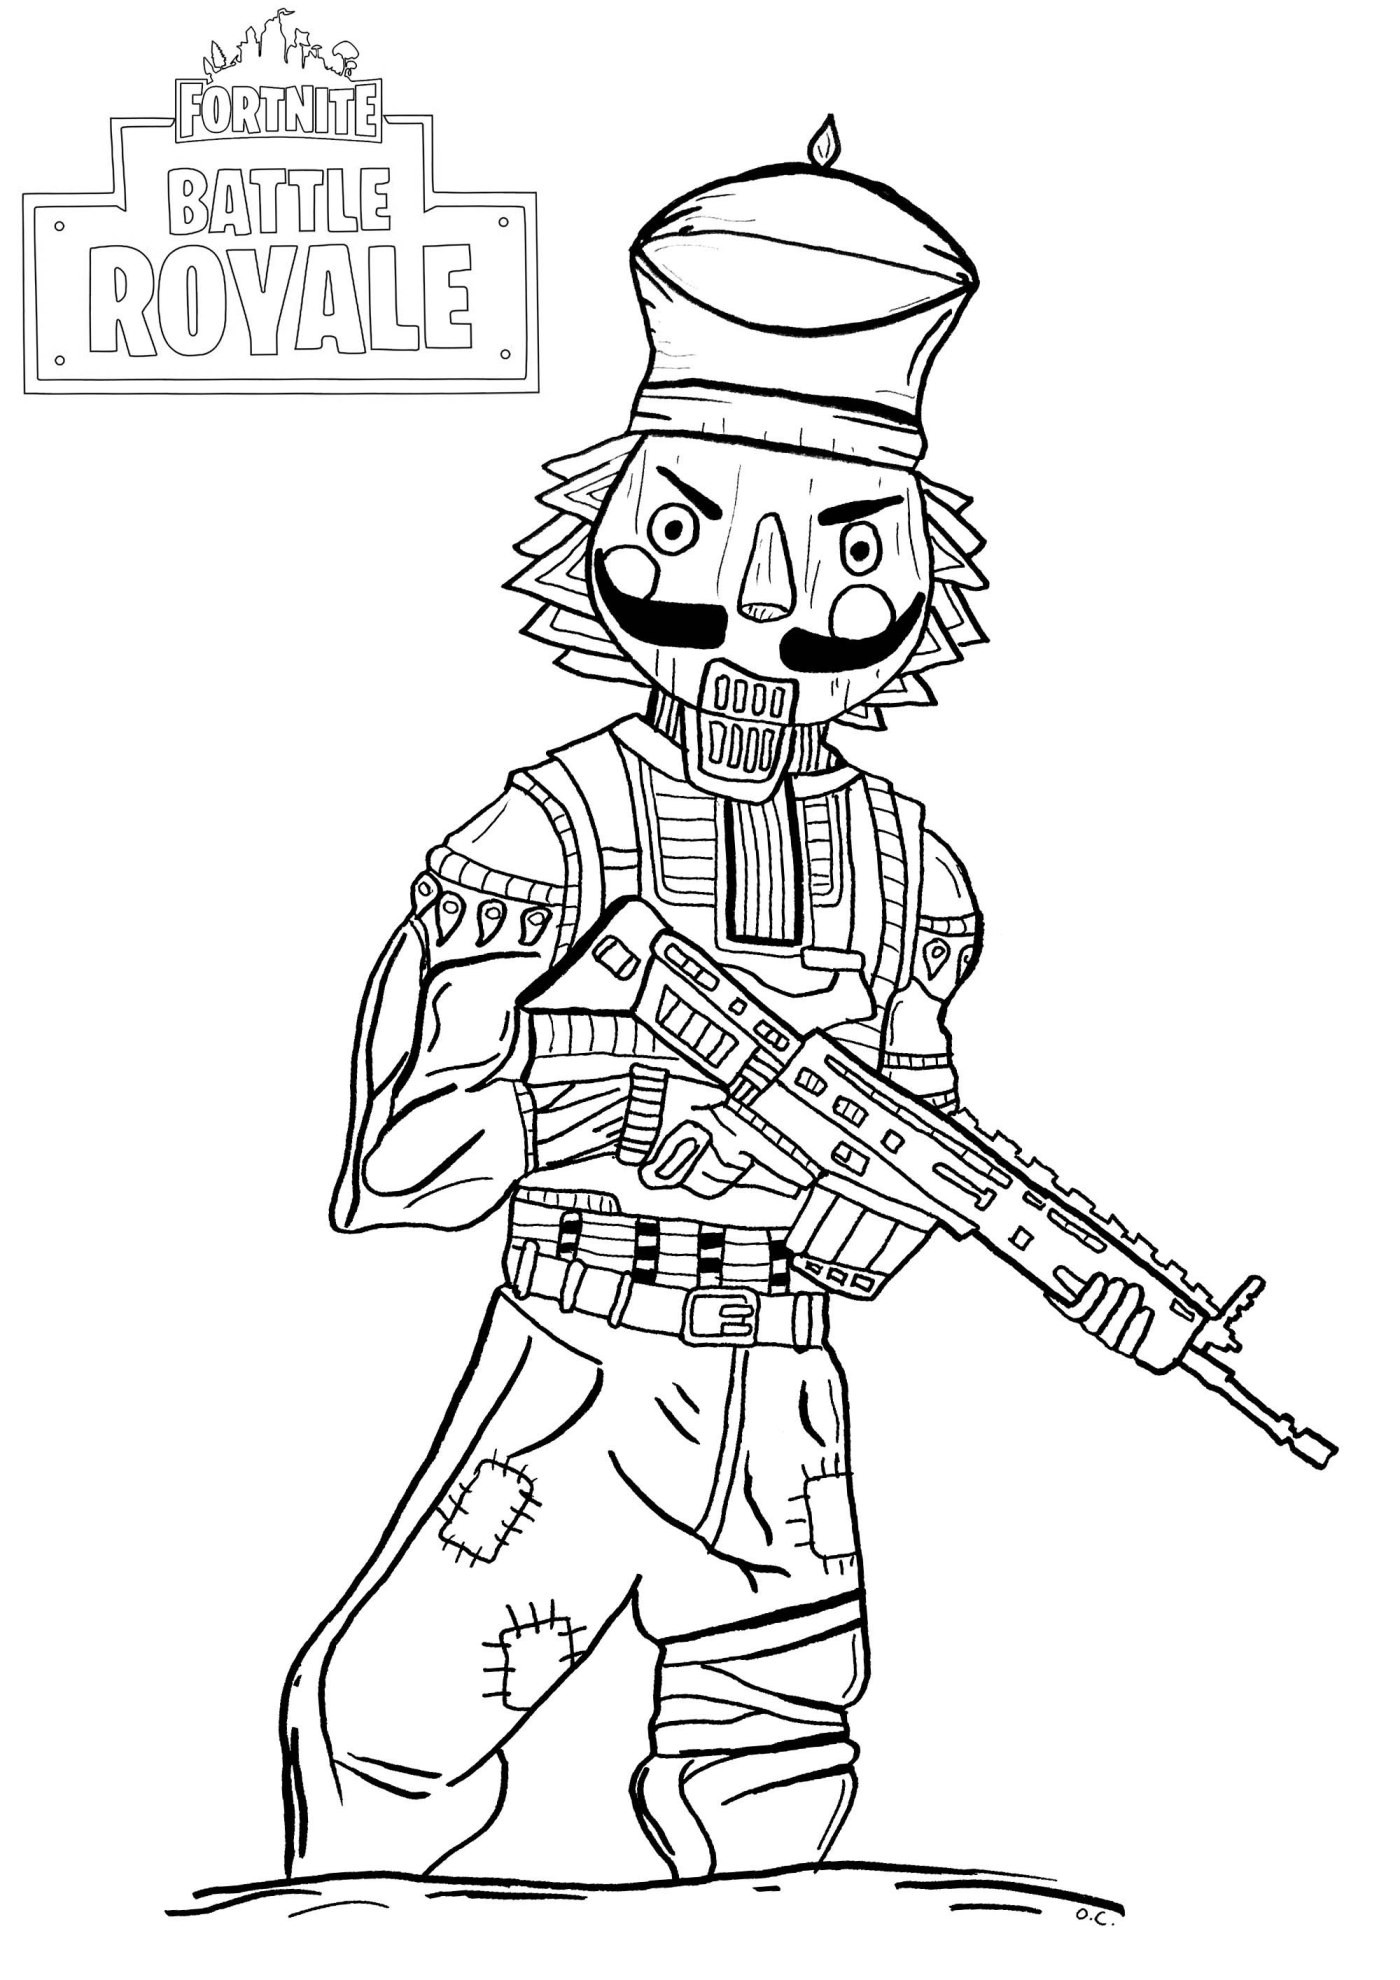 Fortnite Coloring Pages For Kids
 These Fortnite Coloring Pages are the Perfect Gift for